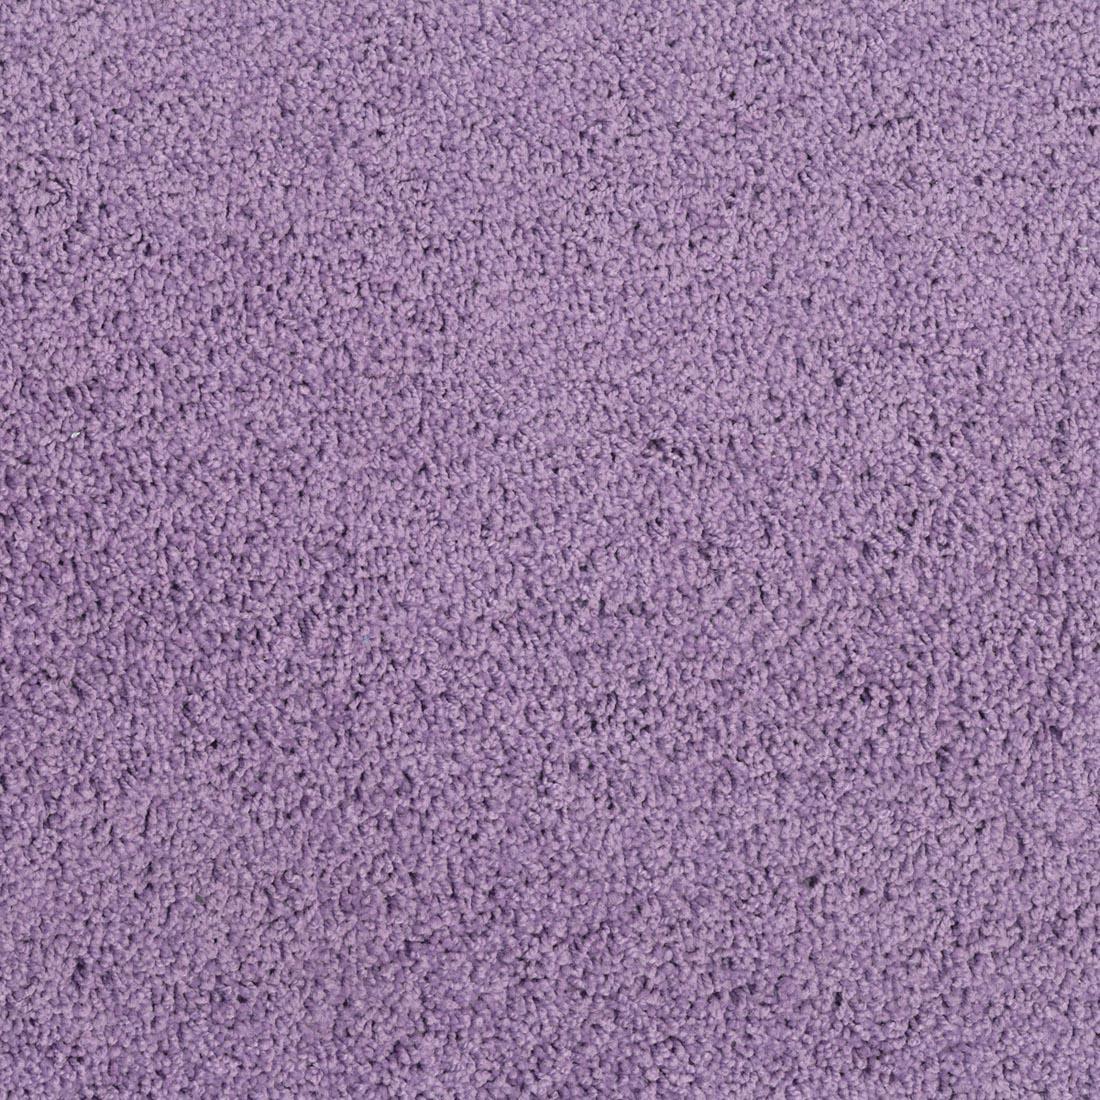 Lilac Color Swatch of the KIDply Soft Solid Rug by Carpets For Kids